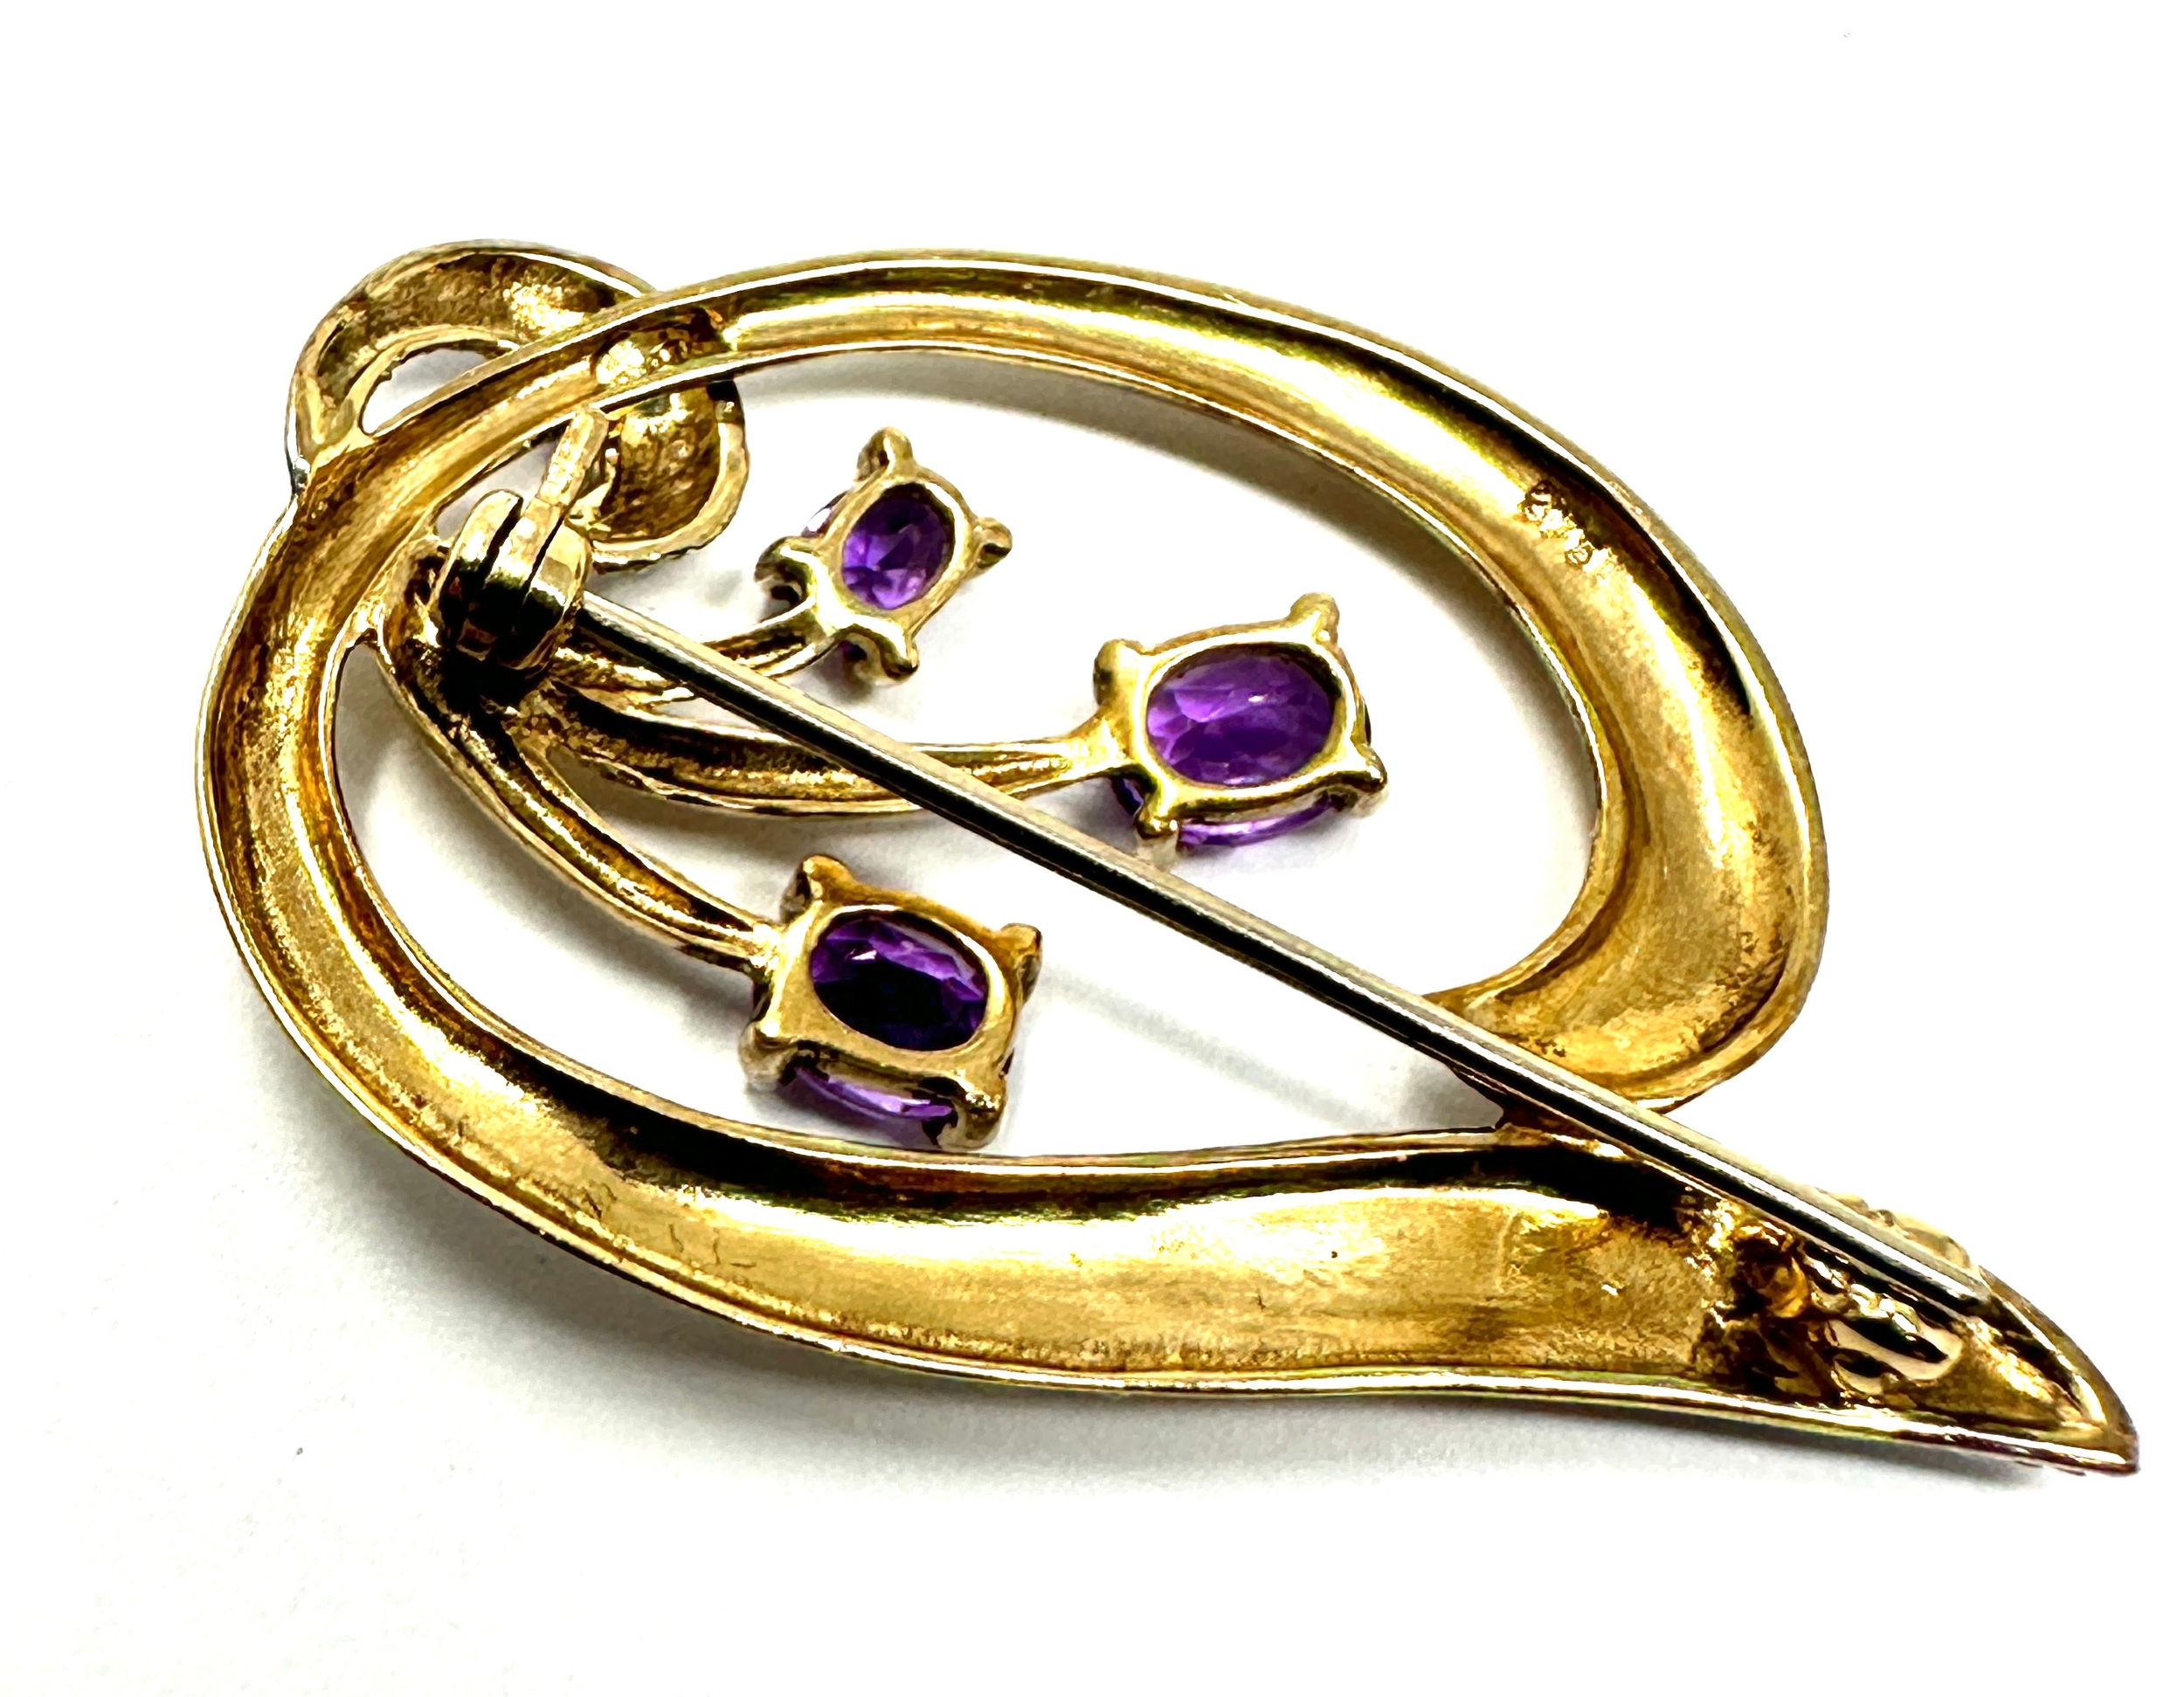 9ct gold amethyst & diamond brooch measures approx 4cm by 2.2cm weight 3.7g - Image 2 of 3